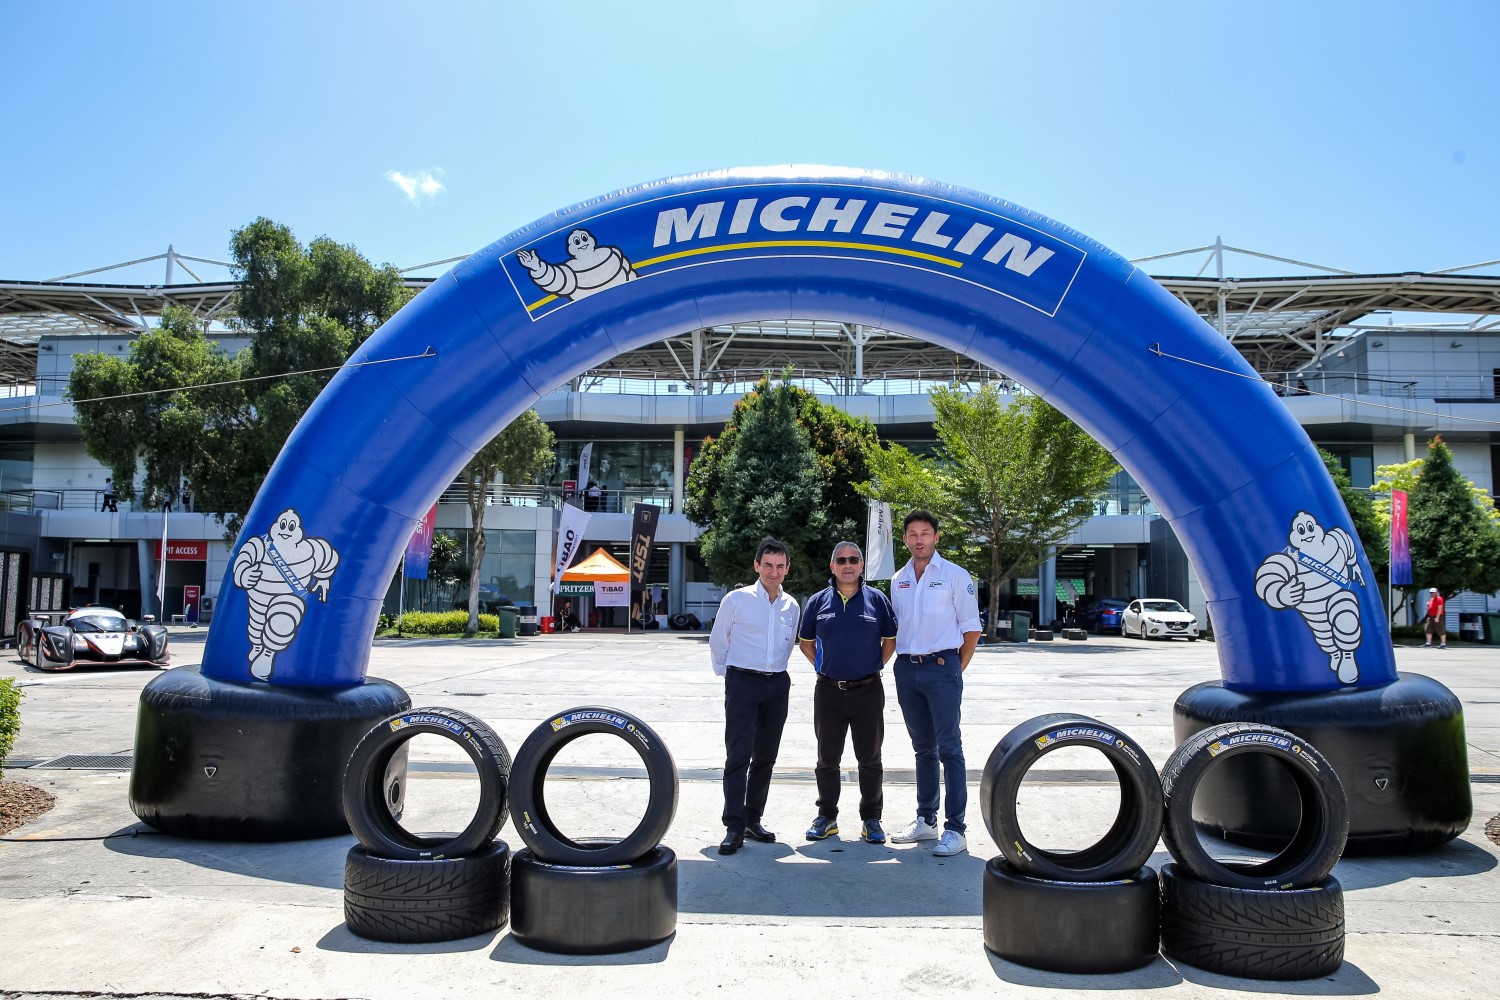 Michelin has long history with the ACO - ACO is French and so is Michelin